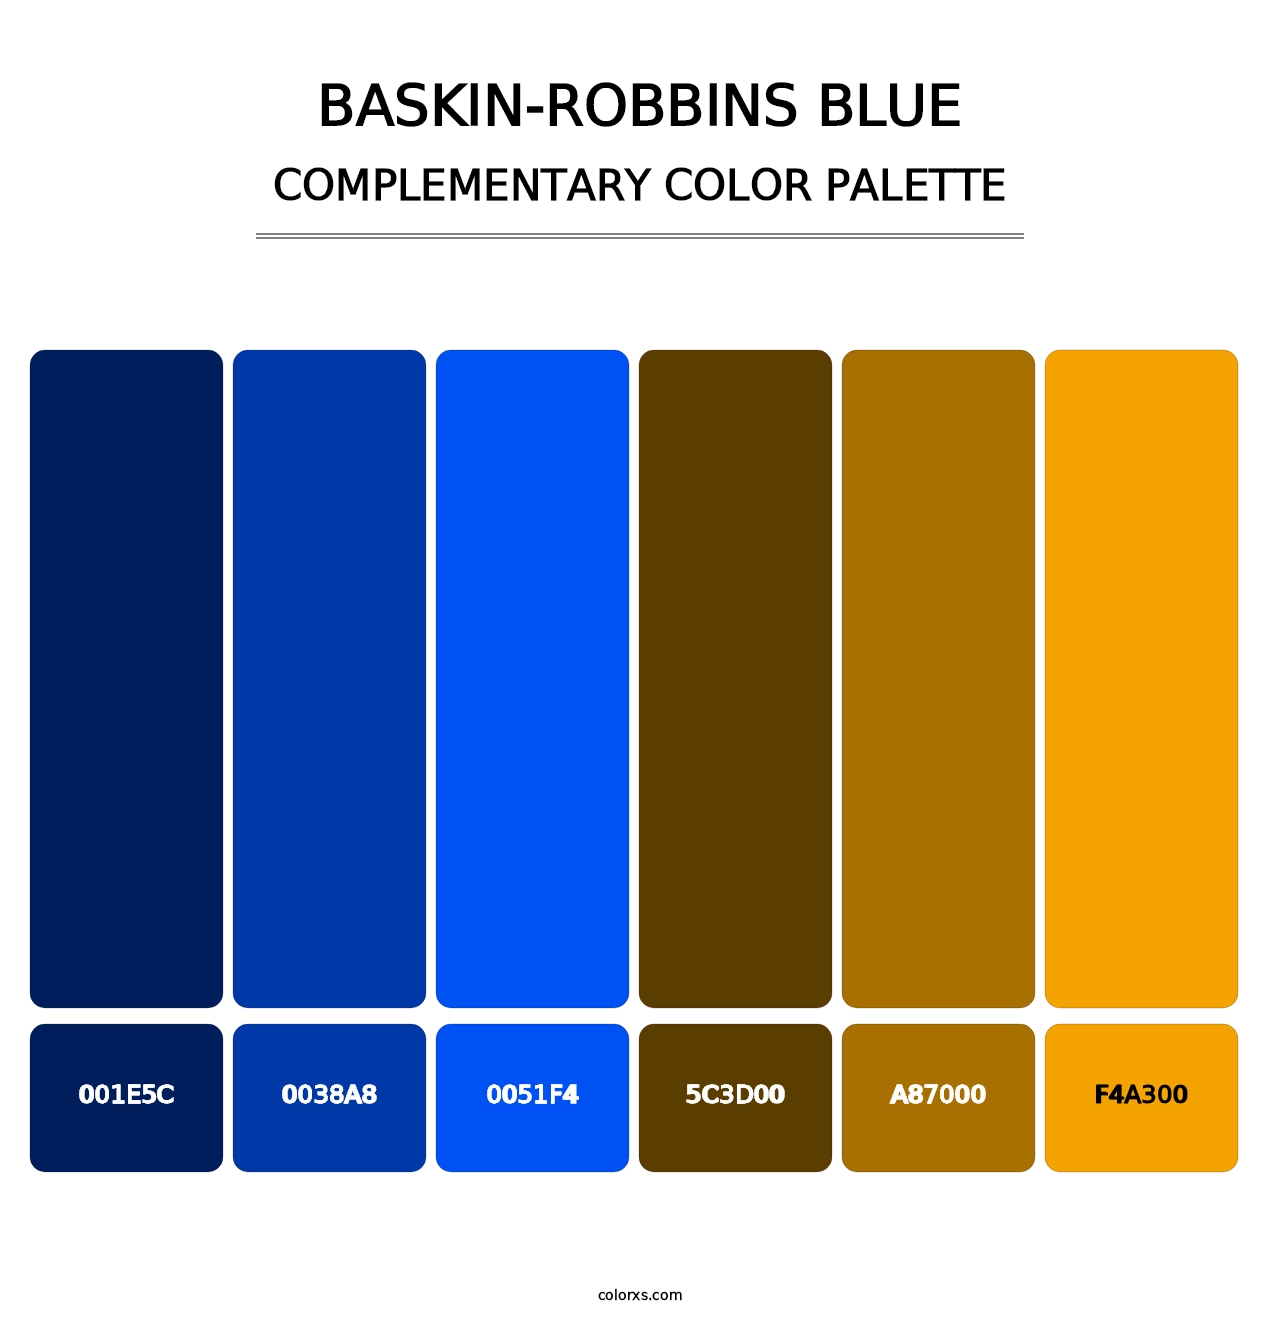 Baskin-Robbins Blue - Complementary Color Palette